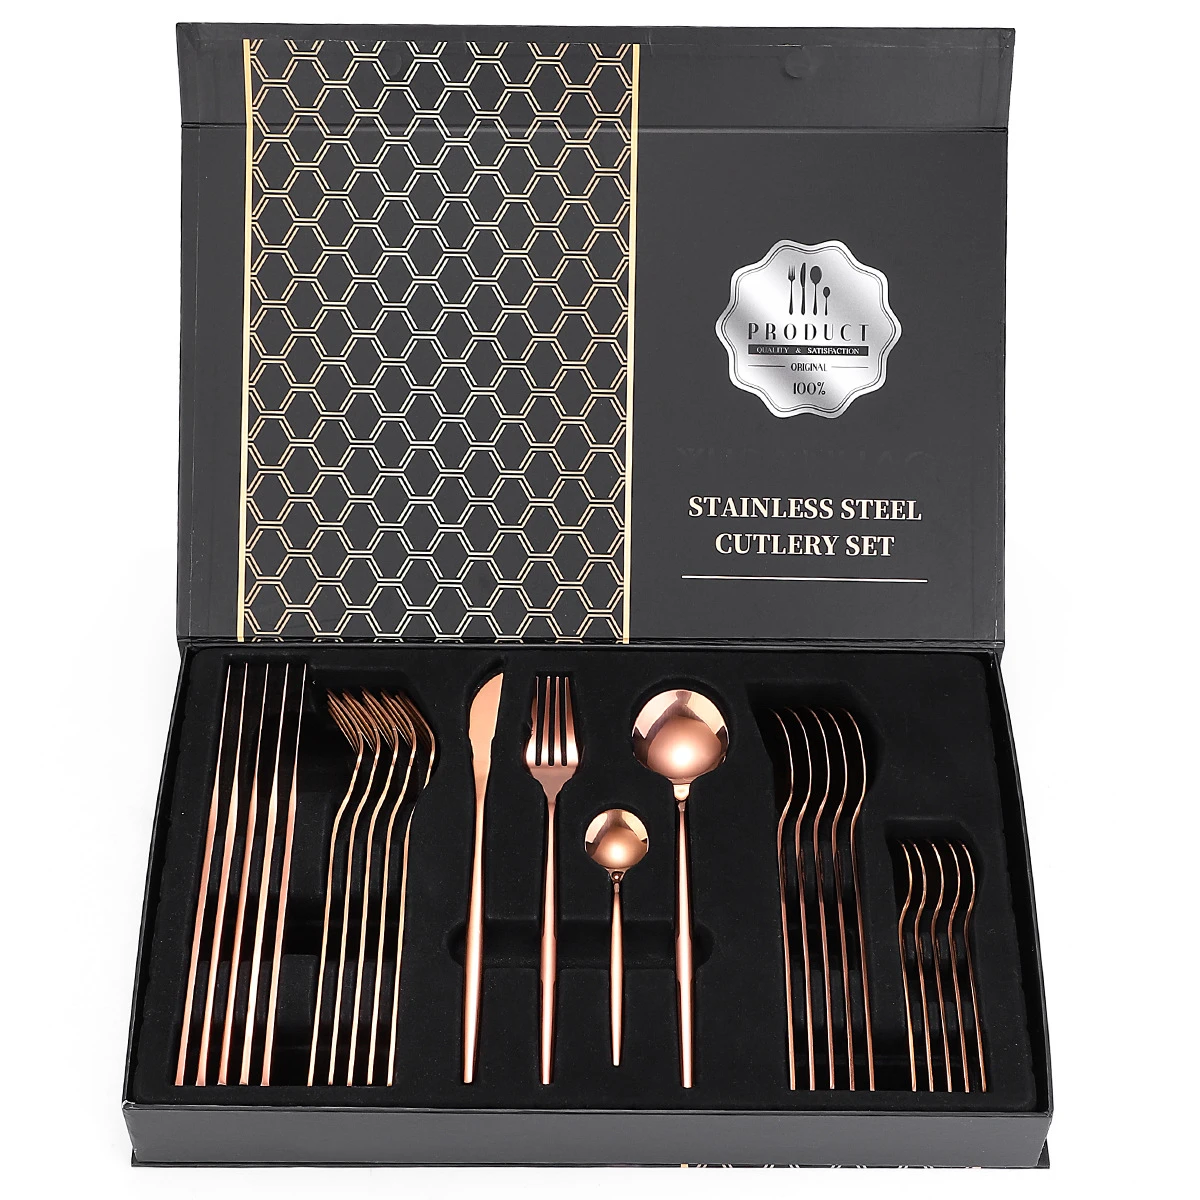 24PCS High-Grade Mirror Polishing Stainless Steel Cutlery Sets Silverware Set With Gift Box